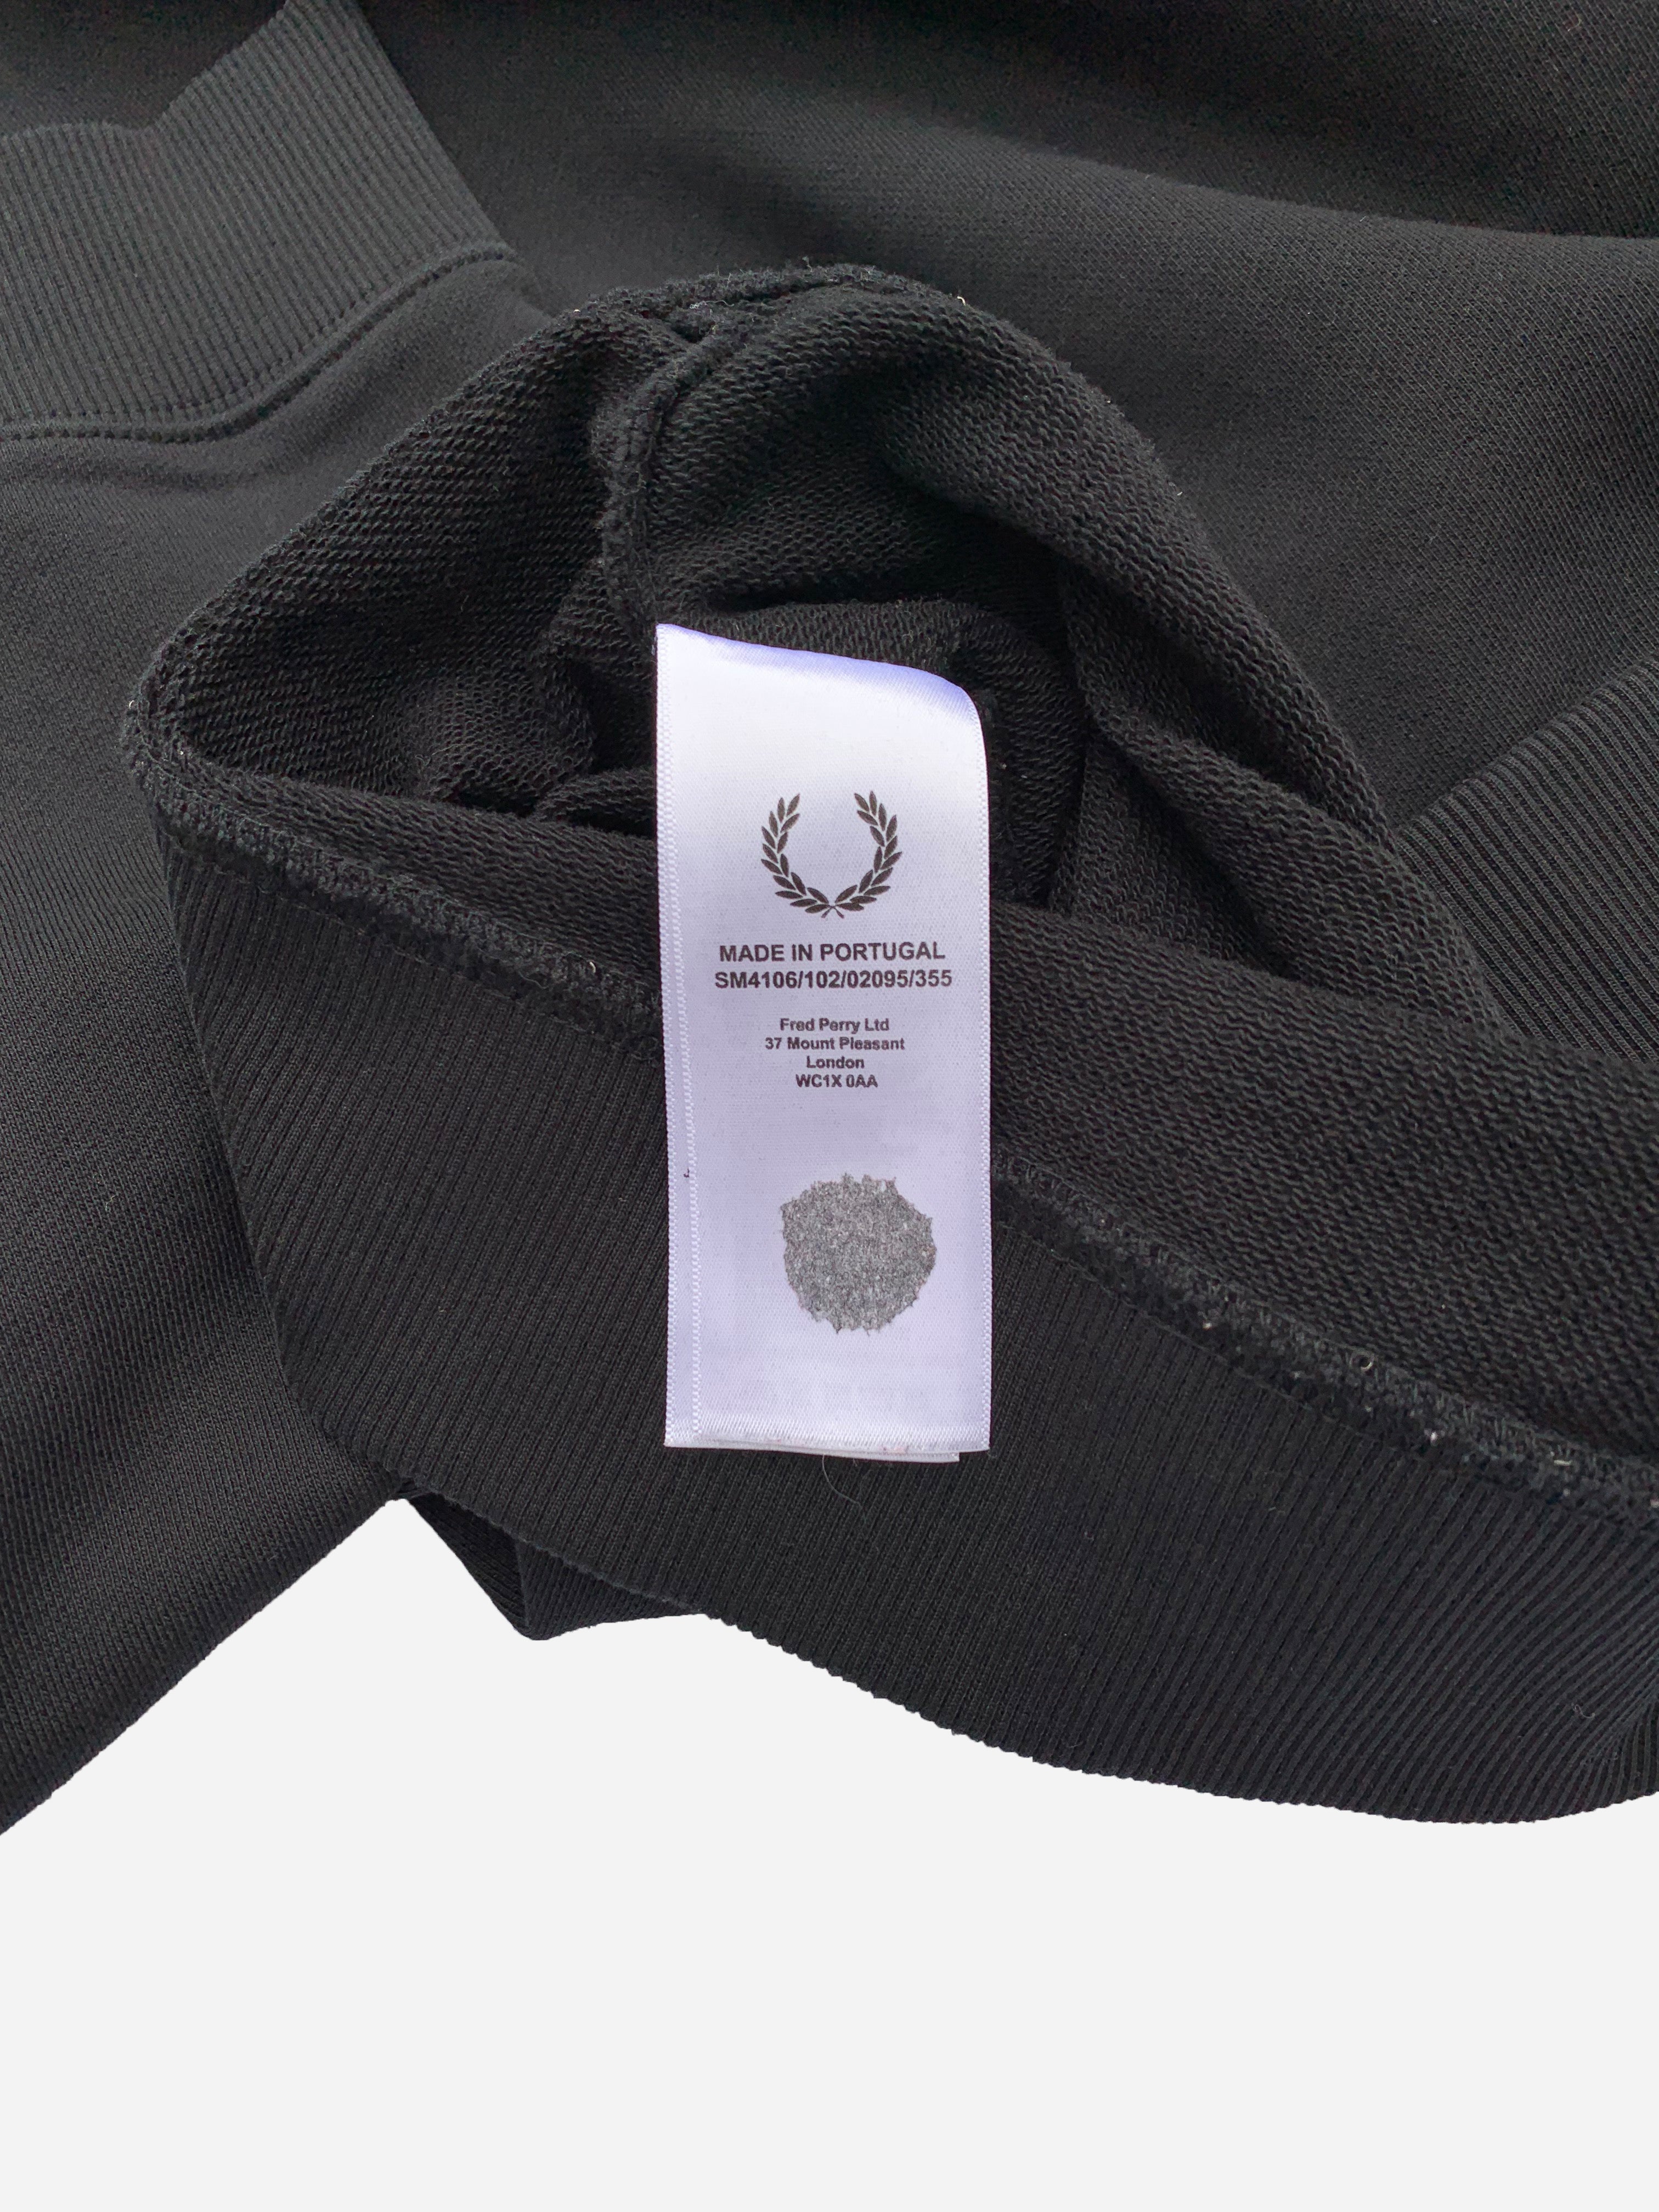 RAF SIMONS X FRED PERRY OVERSIZED TAPE HOODED SWEATSHIRT. (38 / M